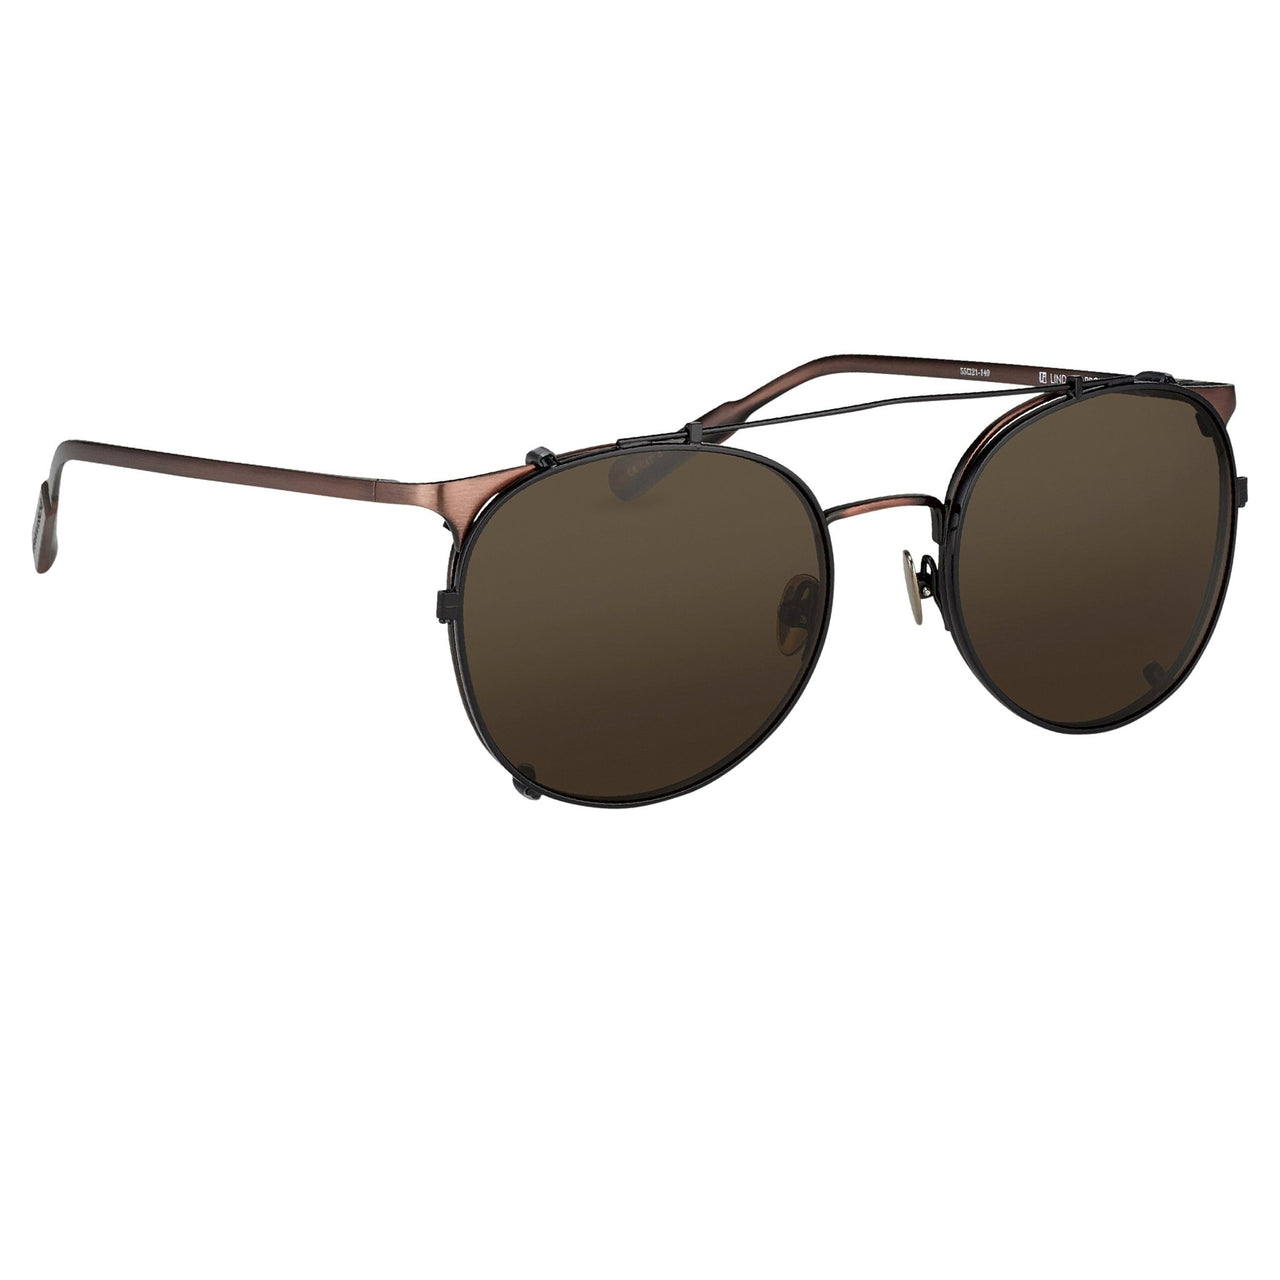 Kris Van Assche Sunglasses Unisex Oval Brushed Bronze Black Clip-On and Grey Lenses Category 3 - KVA69C1SUN - Watches & Crystals